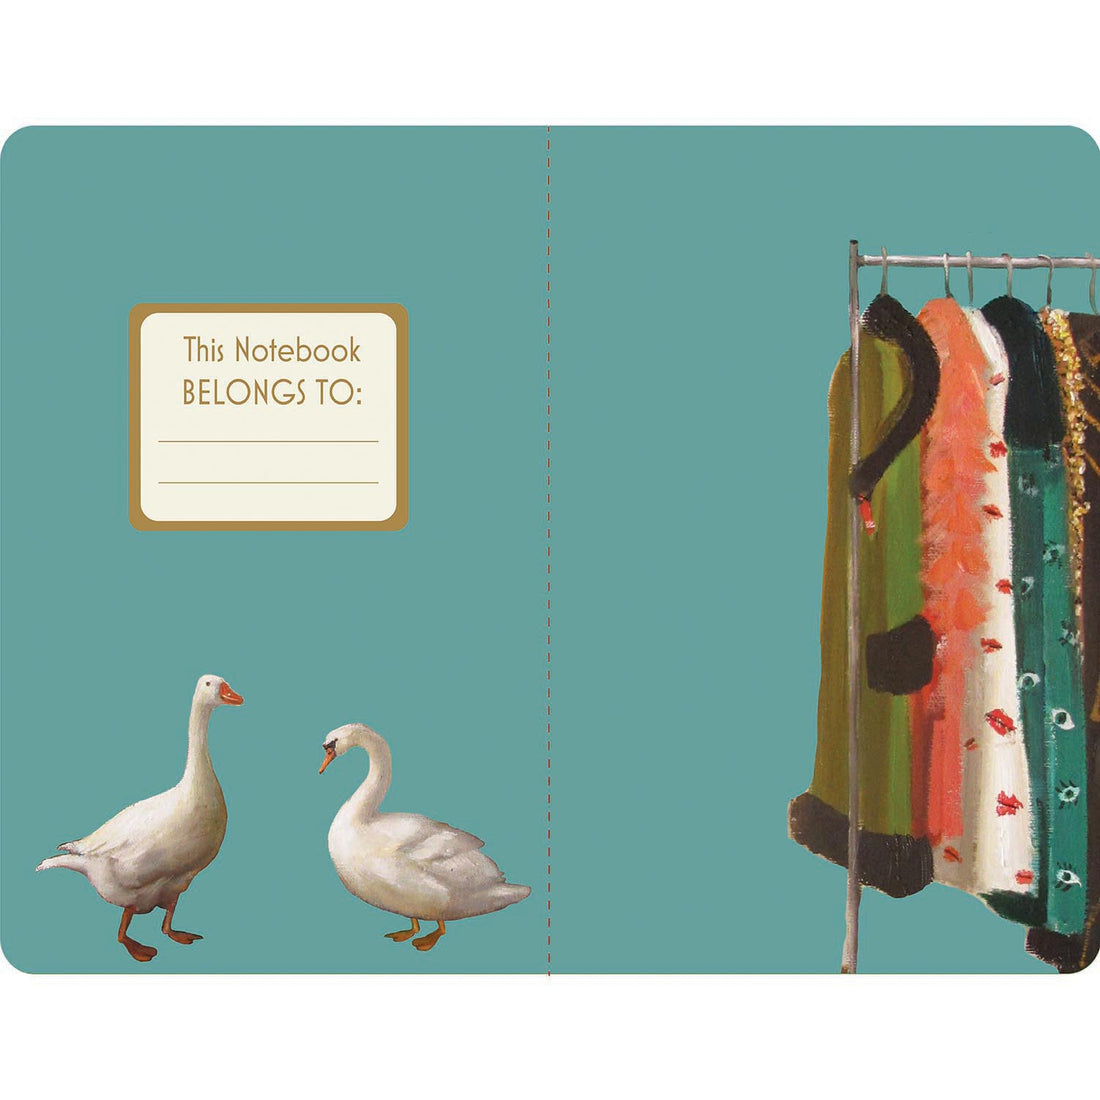 The inside front and back covers of the Swan and Duck Notebook, featuring a gold-framed section labeled &quot;This Notebook Belongs To:&quot; with blank lines and the swan and duck from the cover in the front, and the coat rack artwork in the back, all over a teal background.